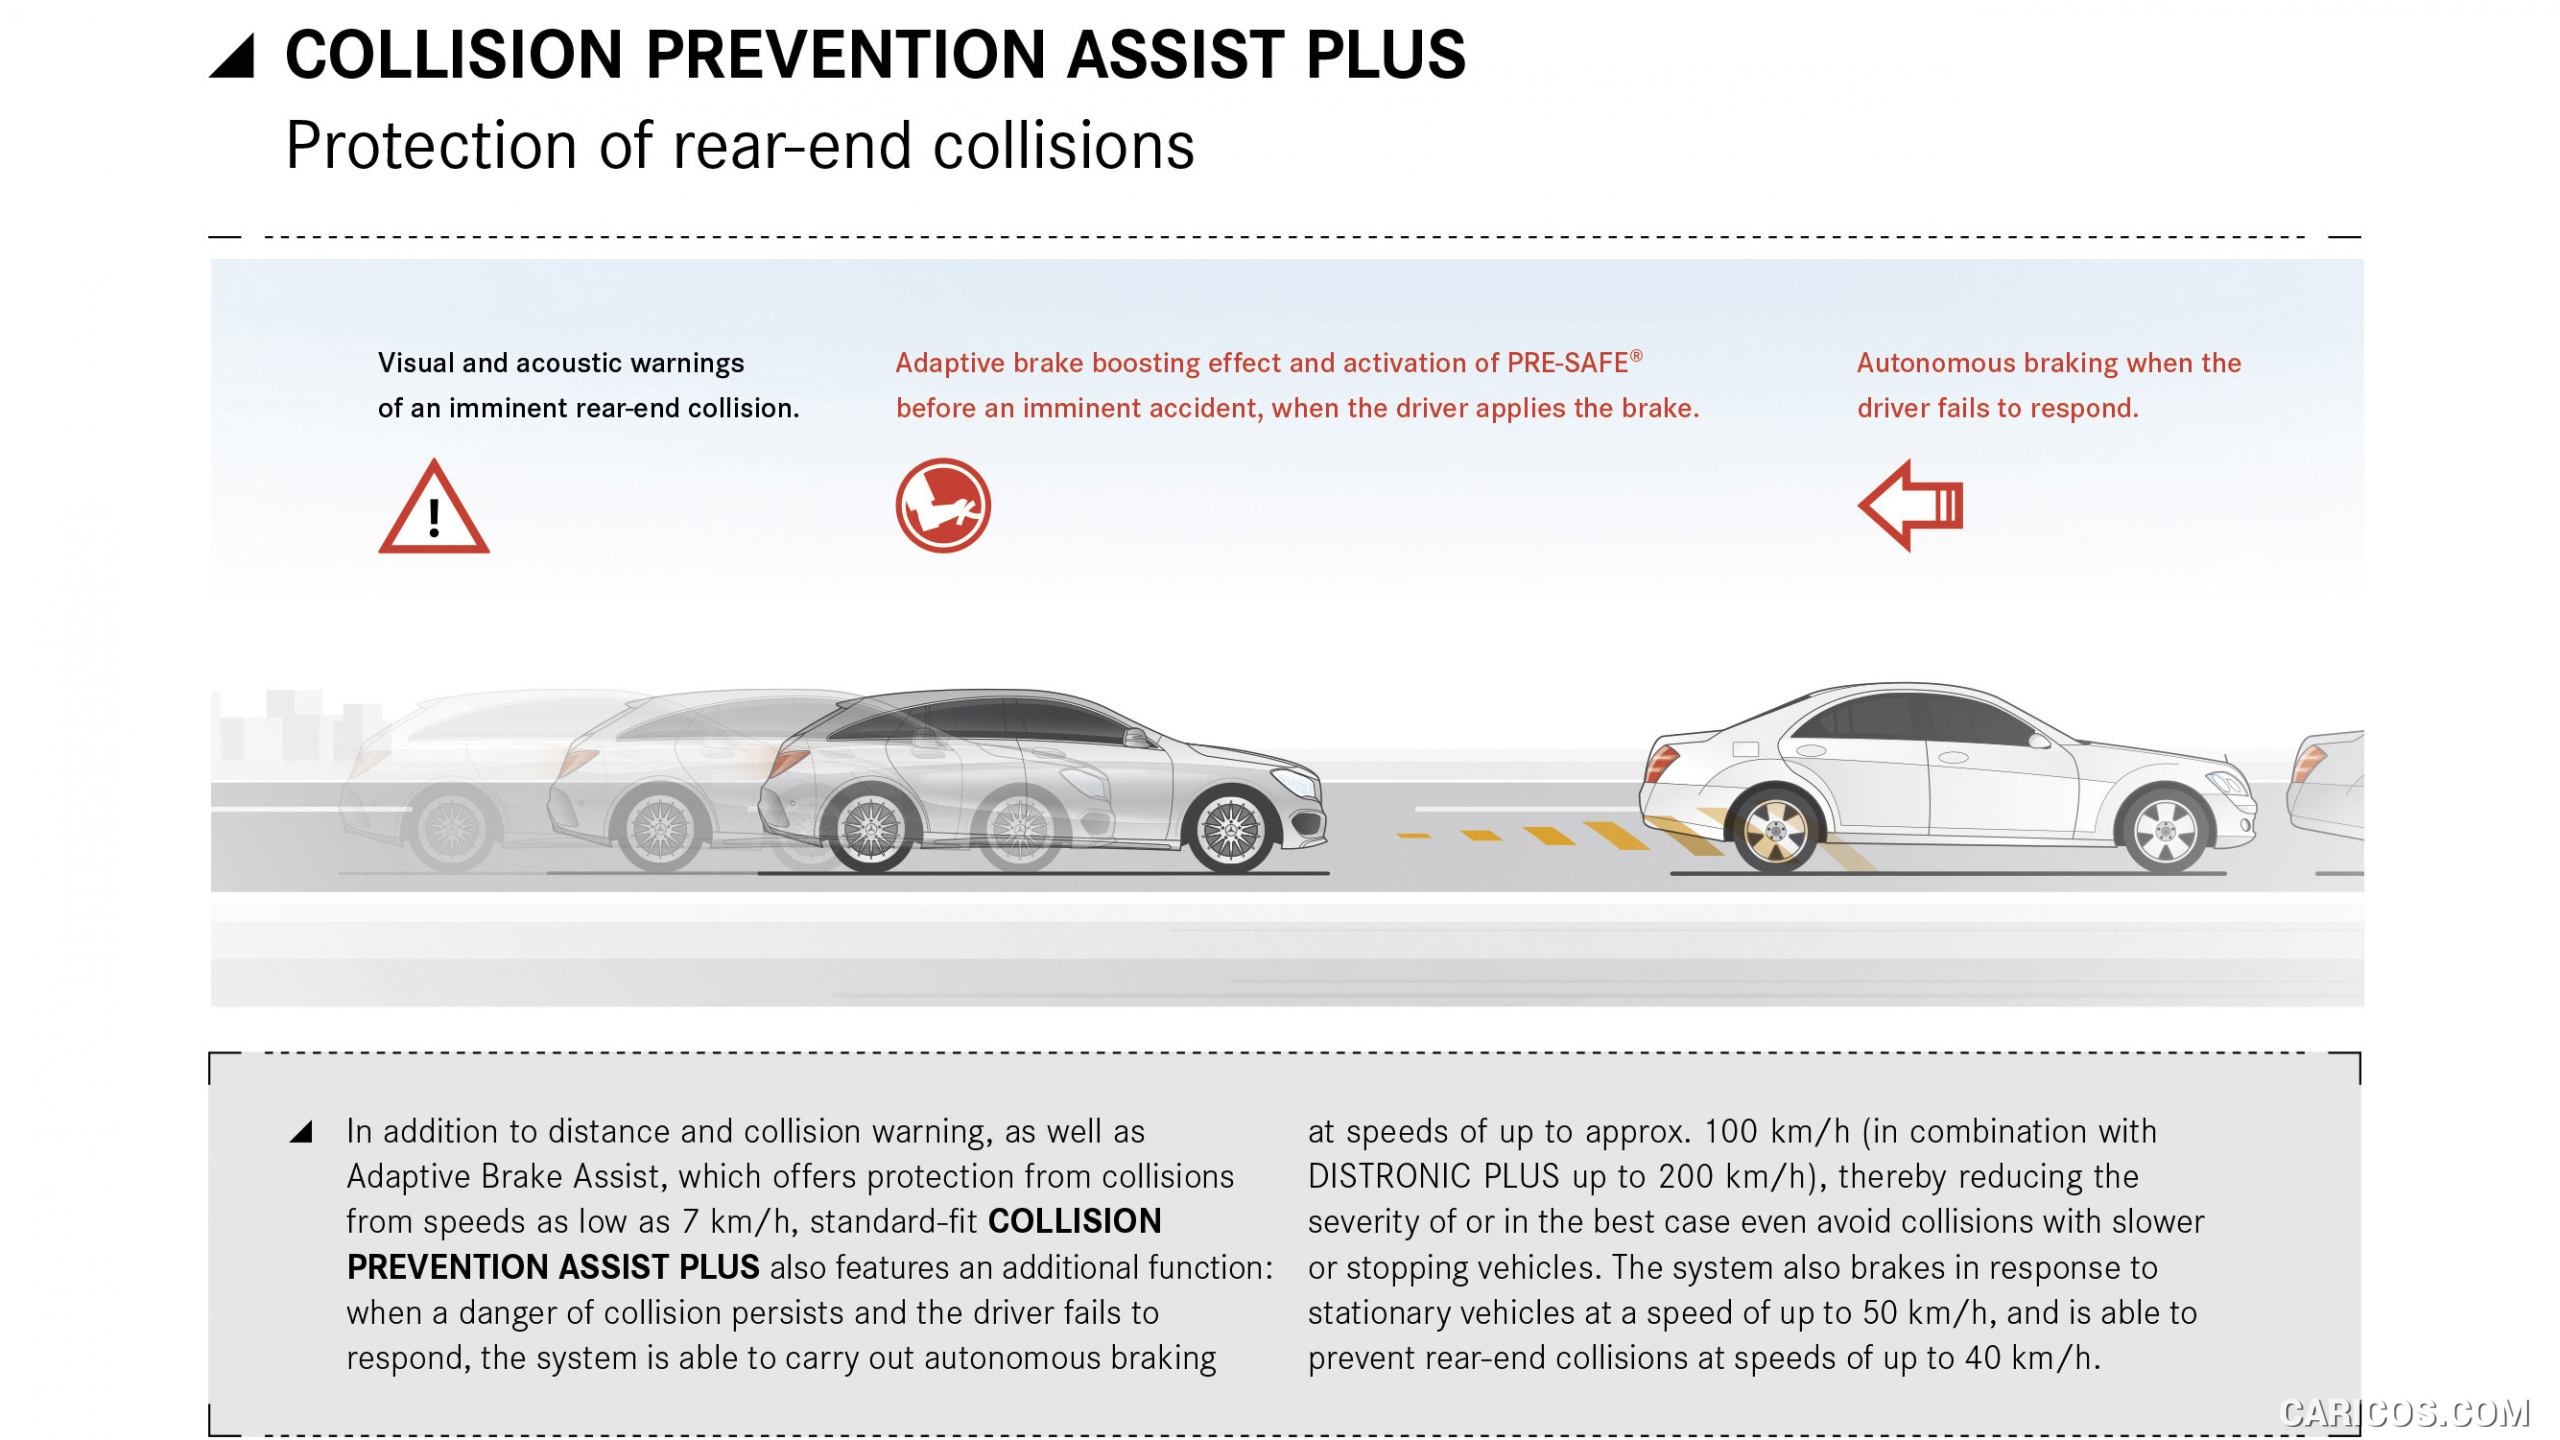 2015 Mercedes-Benz CLA-Class Shooting Brake - Collision Prevention Assist Plus - , #58 of 96